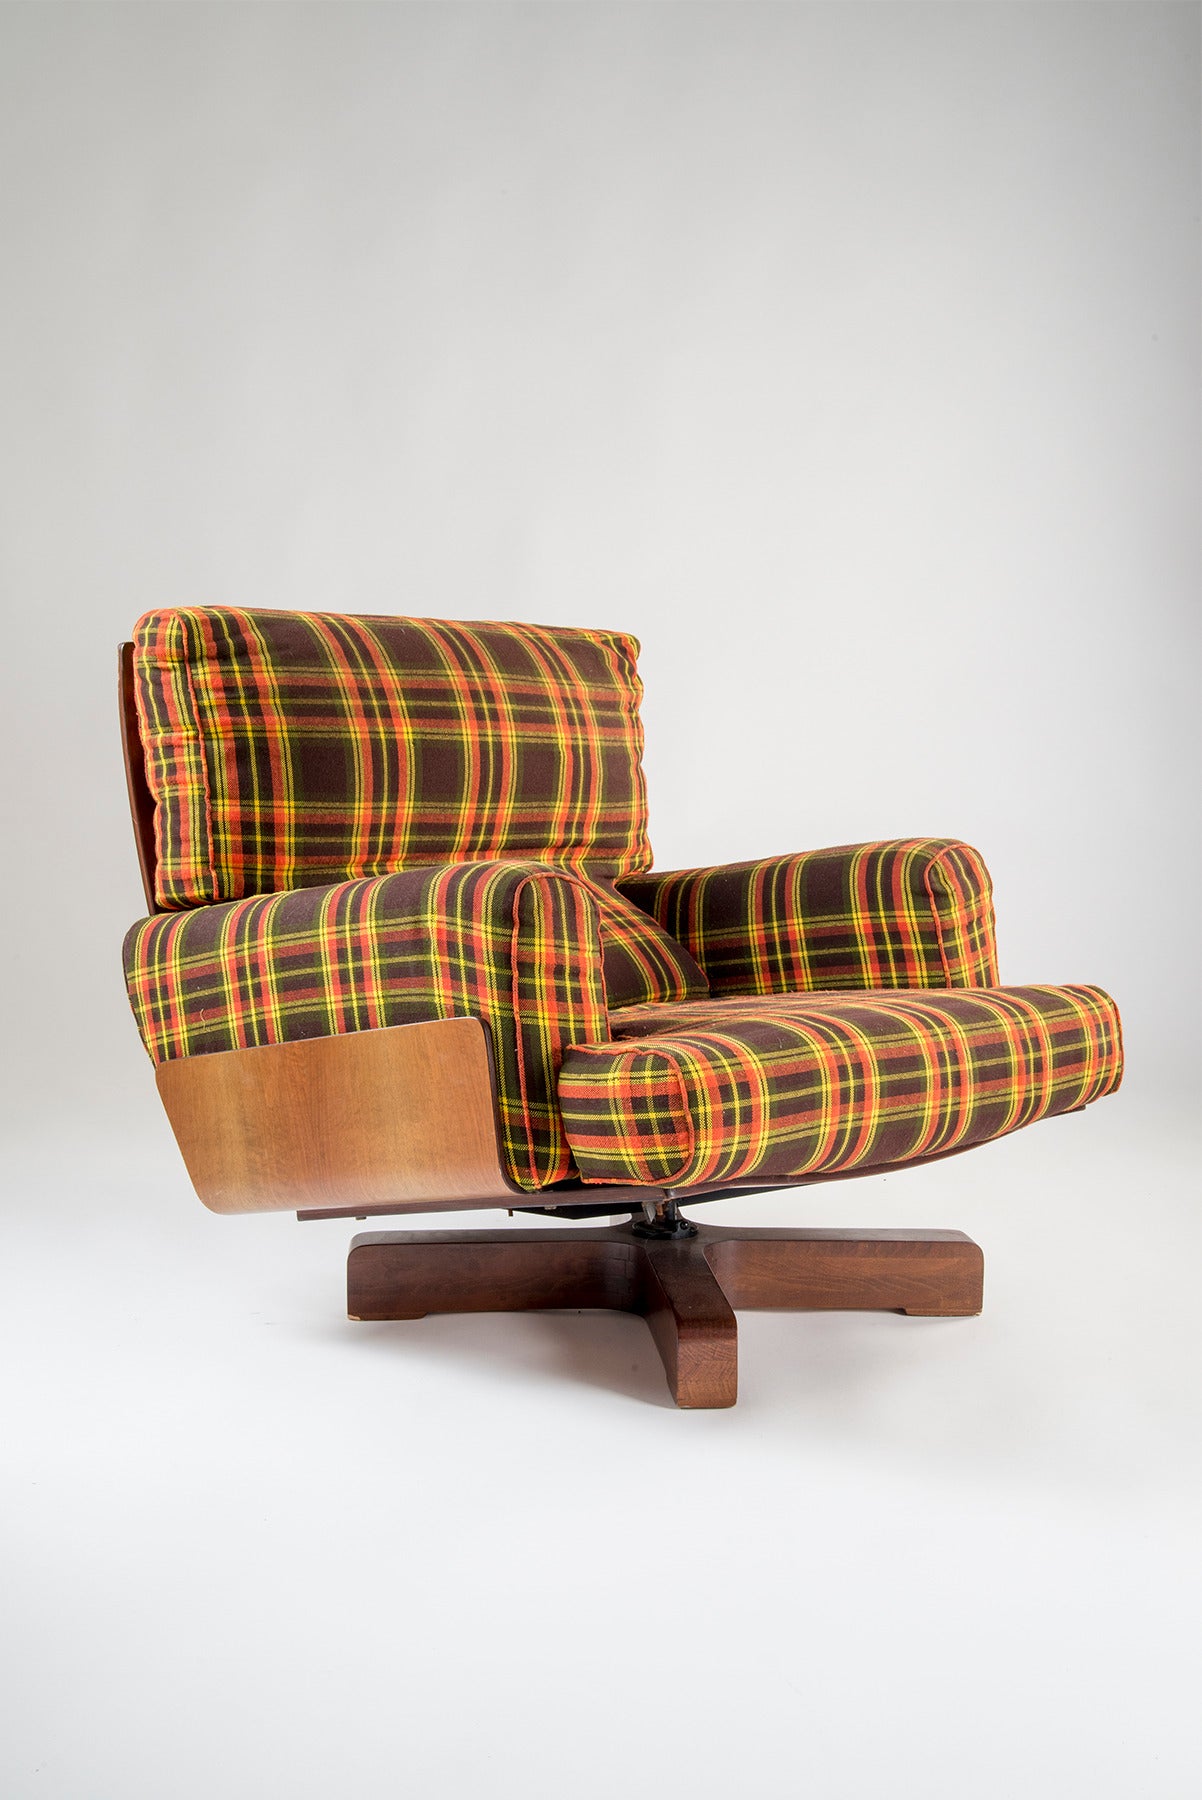 Pair of upholstered armchairs manufactured by Cinova in the '60s. Swiveling wooden structure with bent plywood seat and back, original fabric cover.